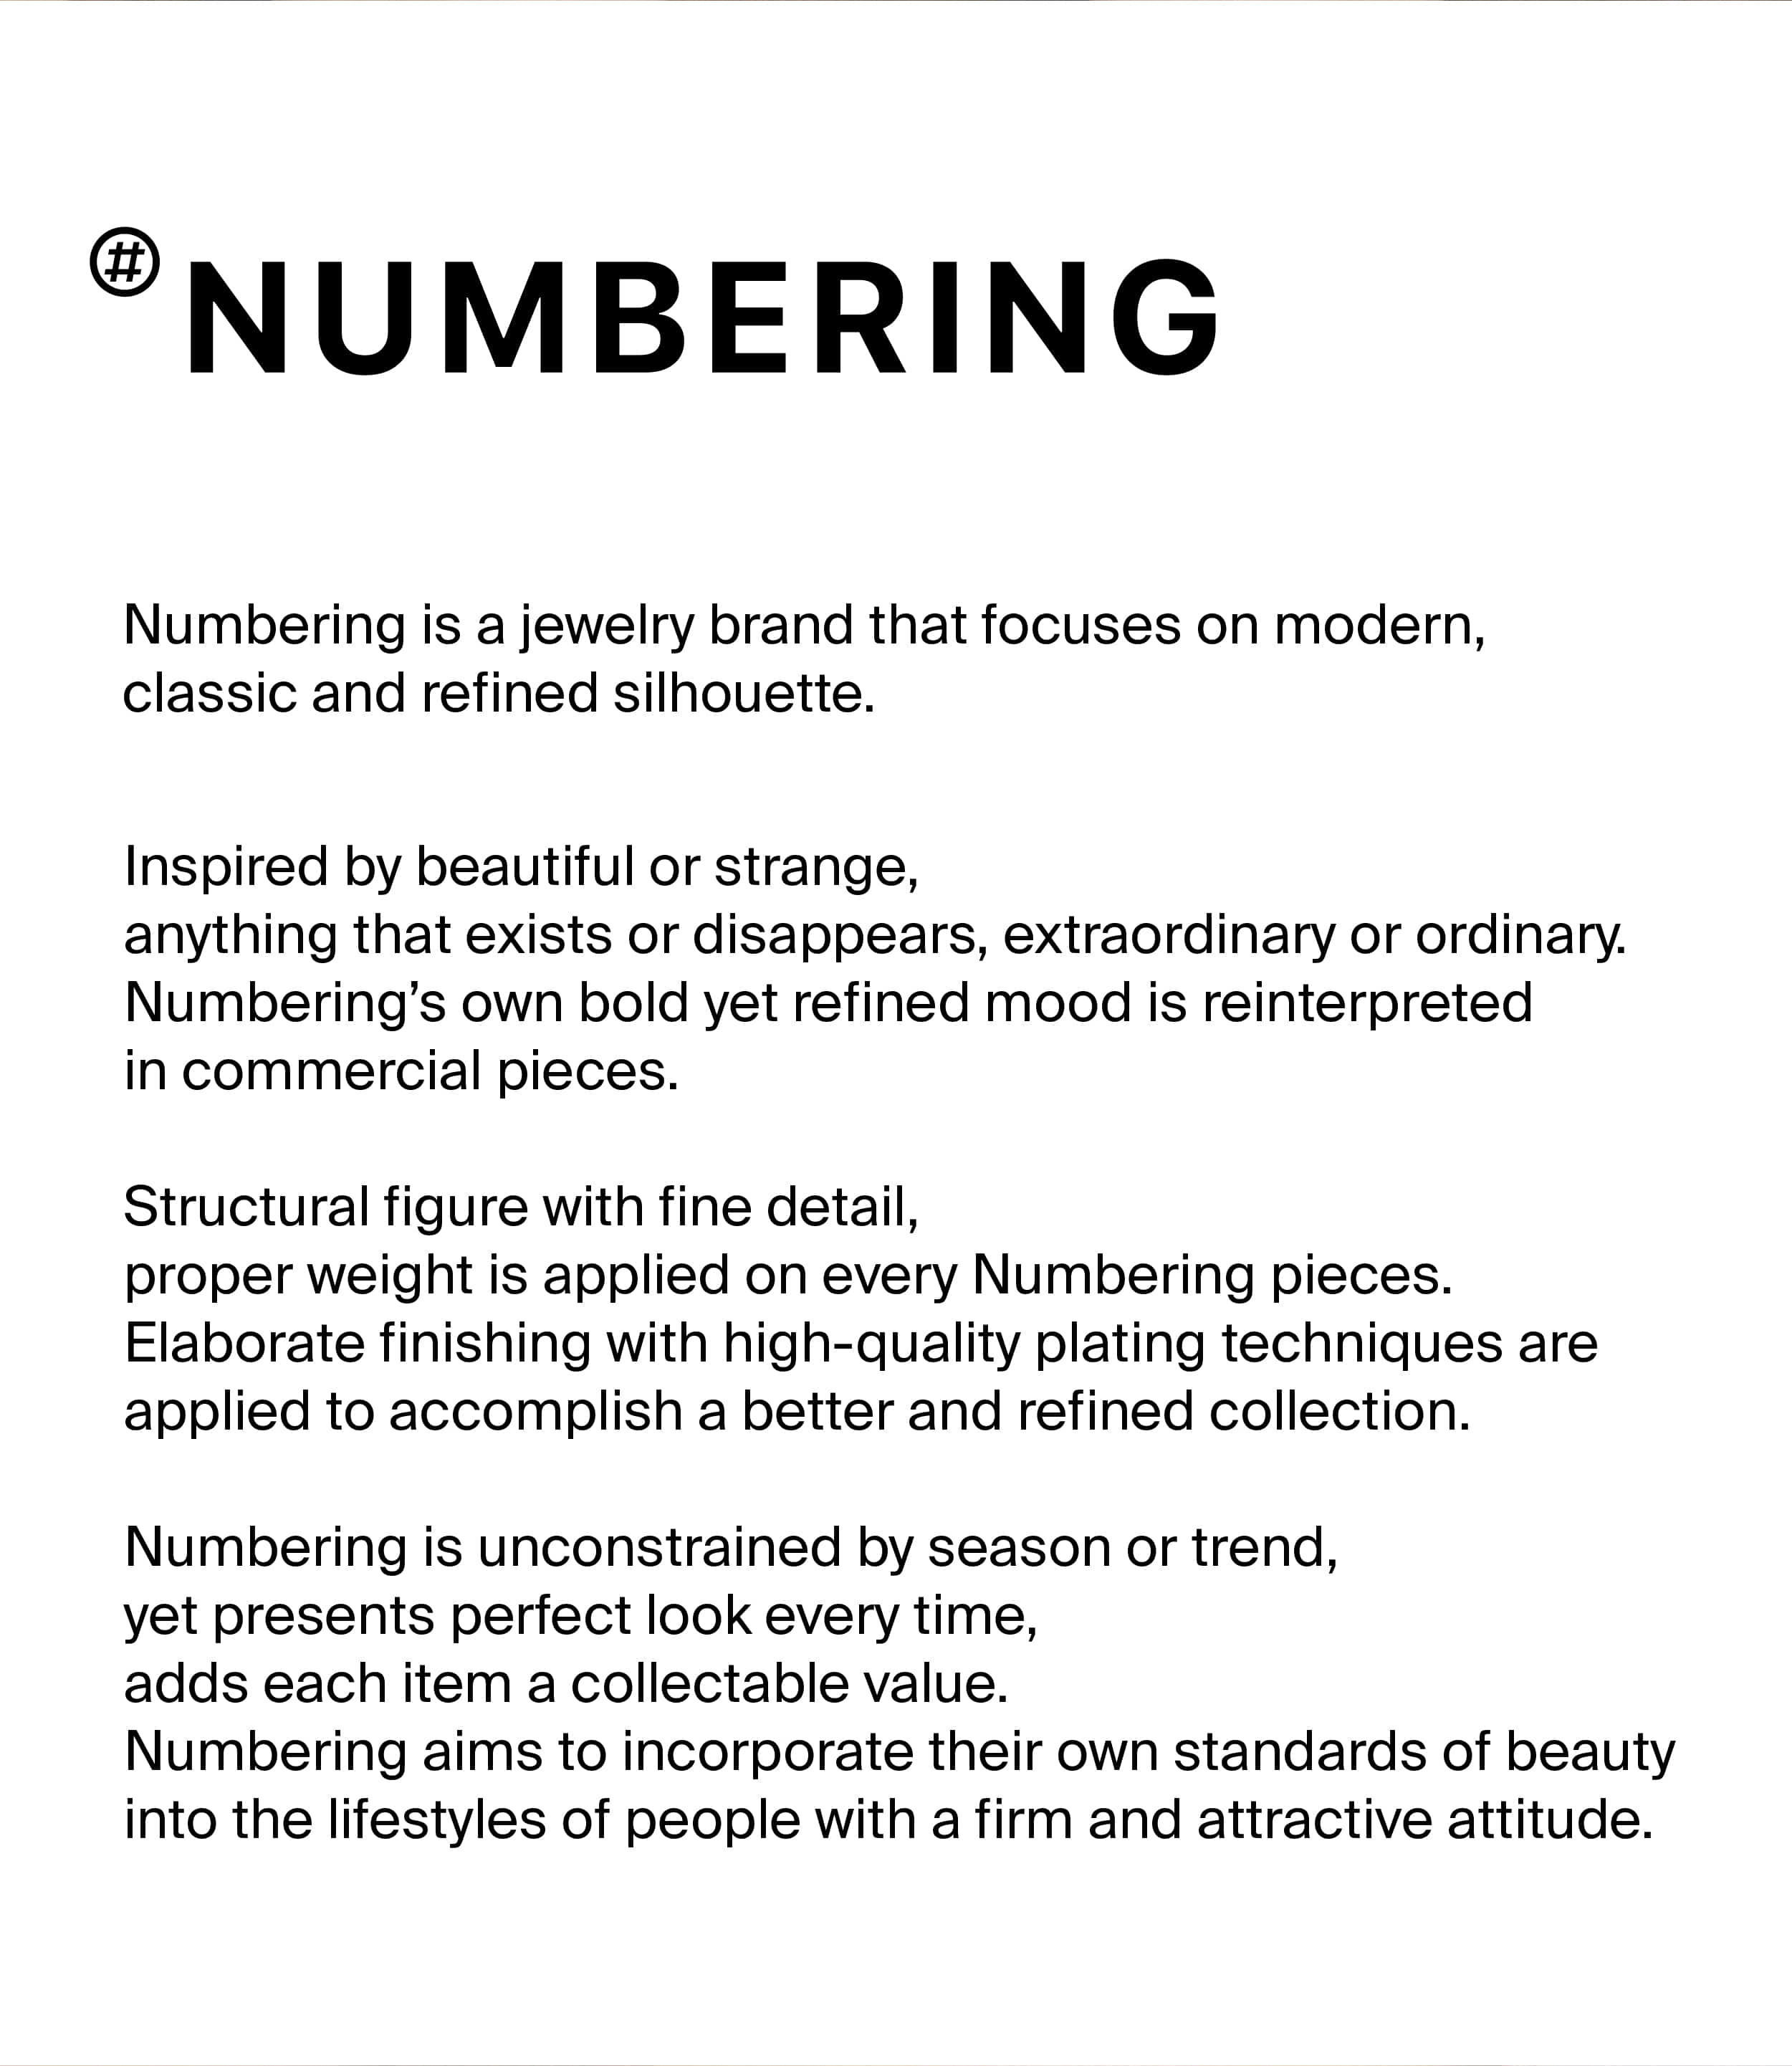 about numbering